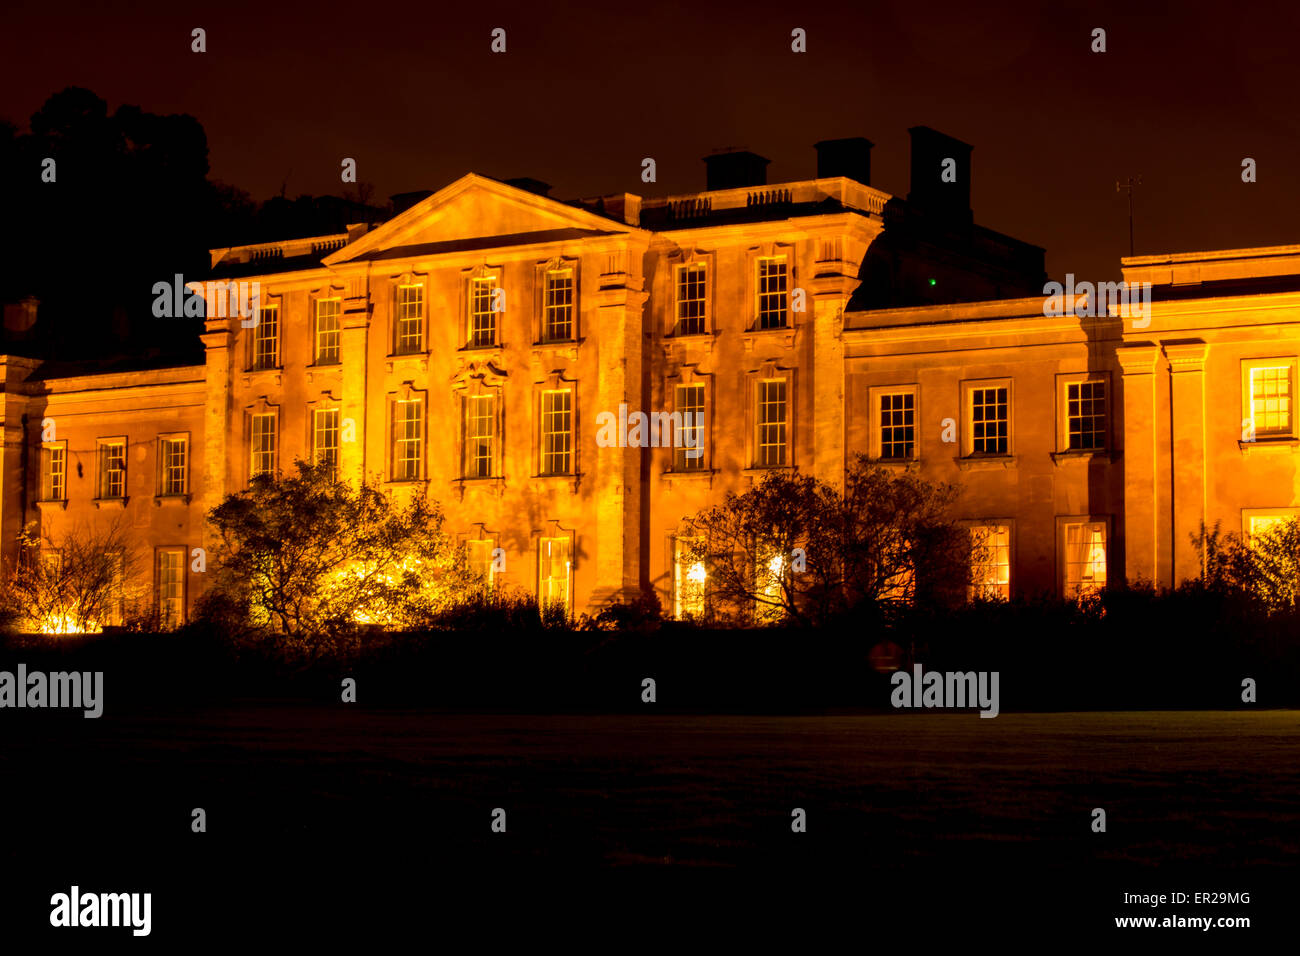 Night scene of Himley Hall illuminated at Himley Hall Park, Dudley, West Midlands. Once ancestral home of the Earl of Dudley. Stock Photo